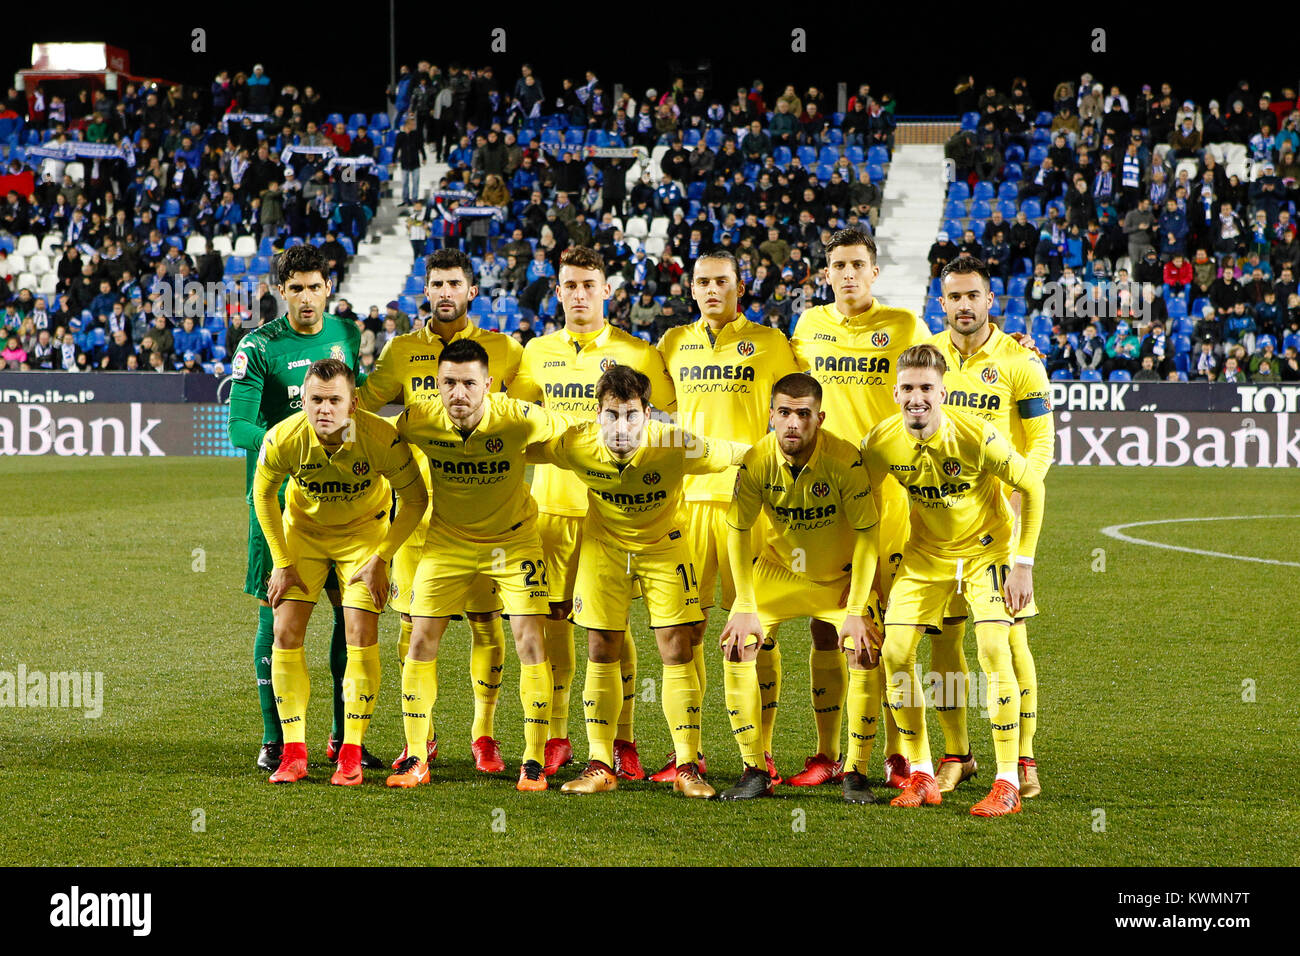 Team Group Liune-up in action during  Copa del Rey match between Leganes FC vs Villerreal CF at the Municipal de Butarque stadium in Madrid, Spain, January 4, 2018 . Stock Photo